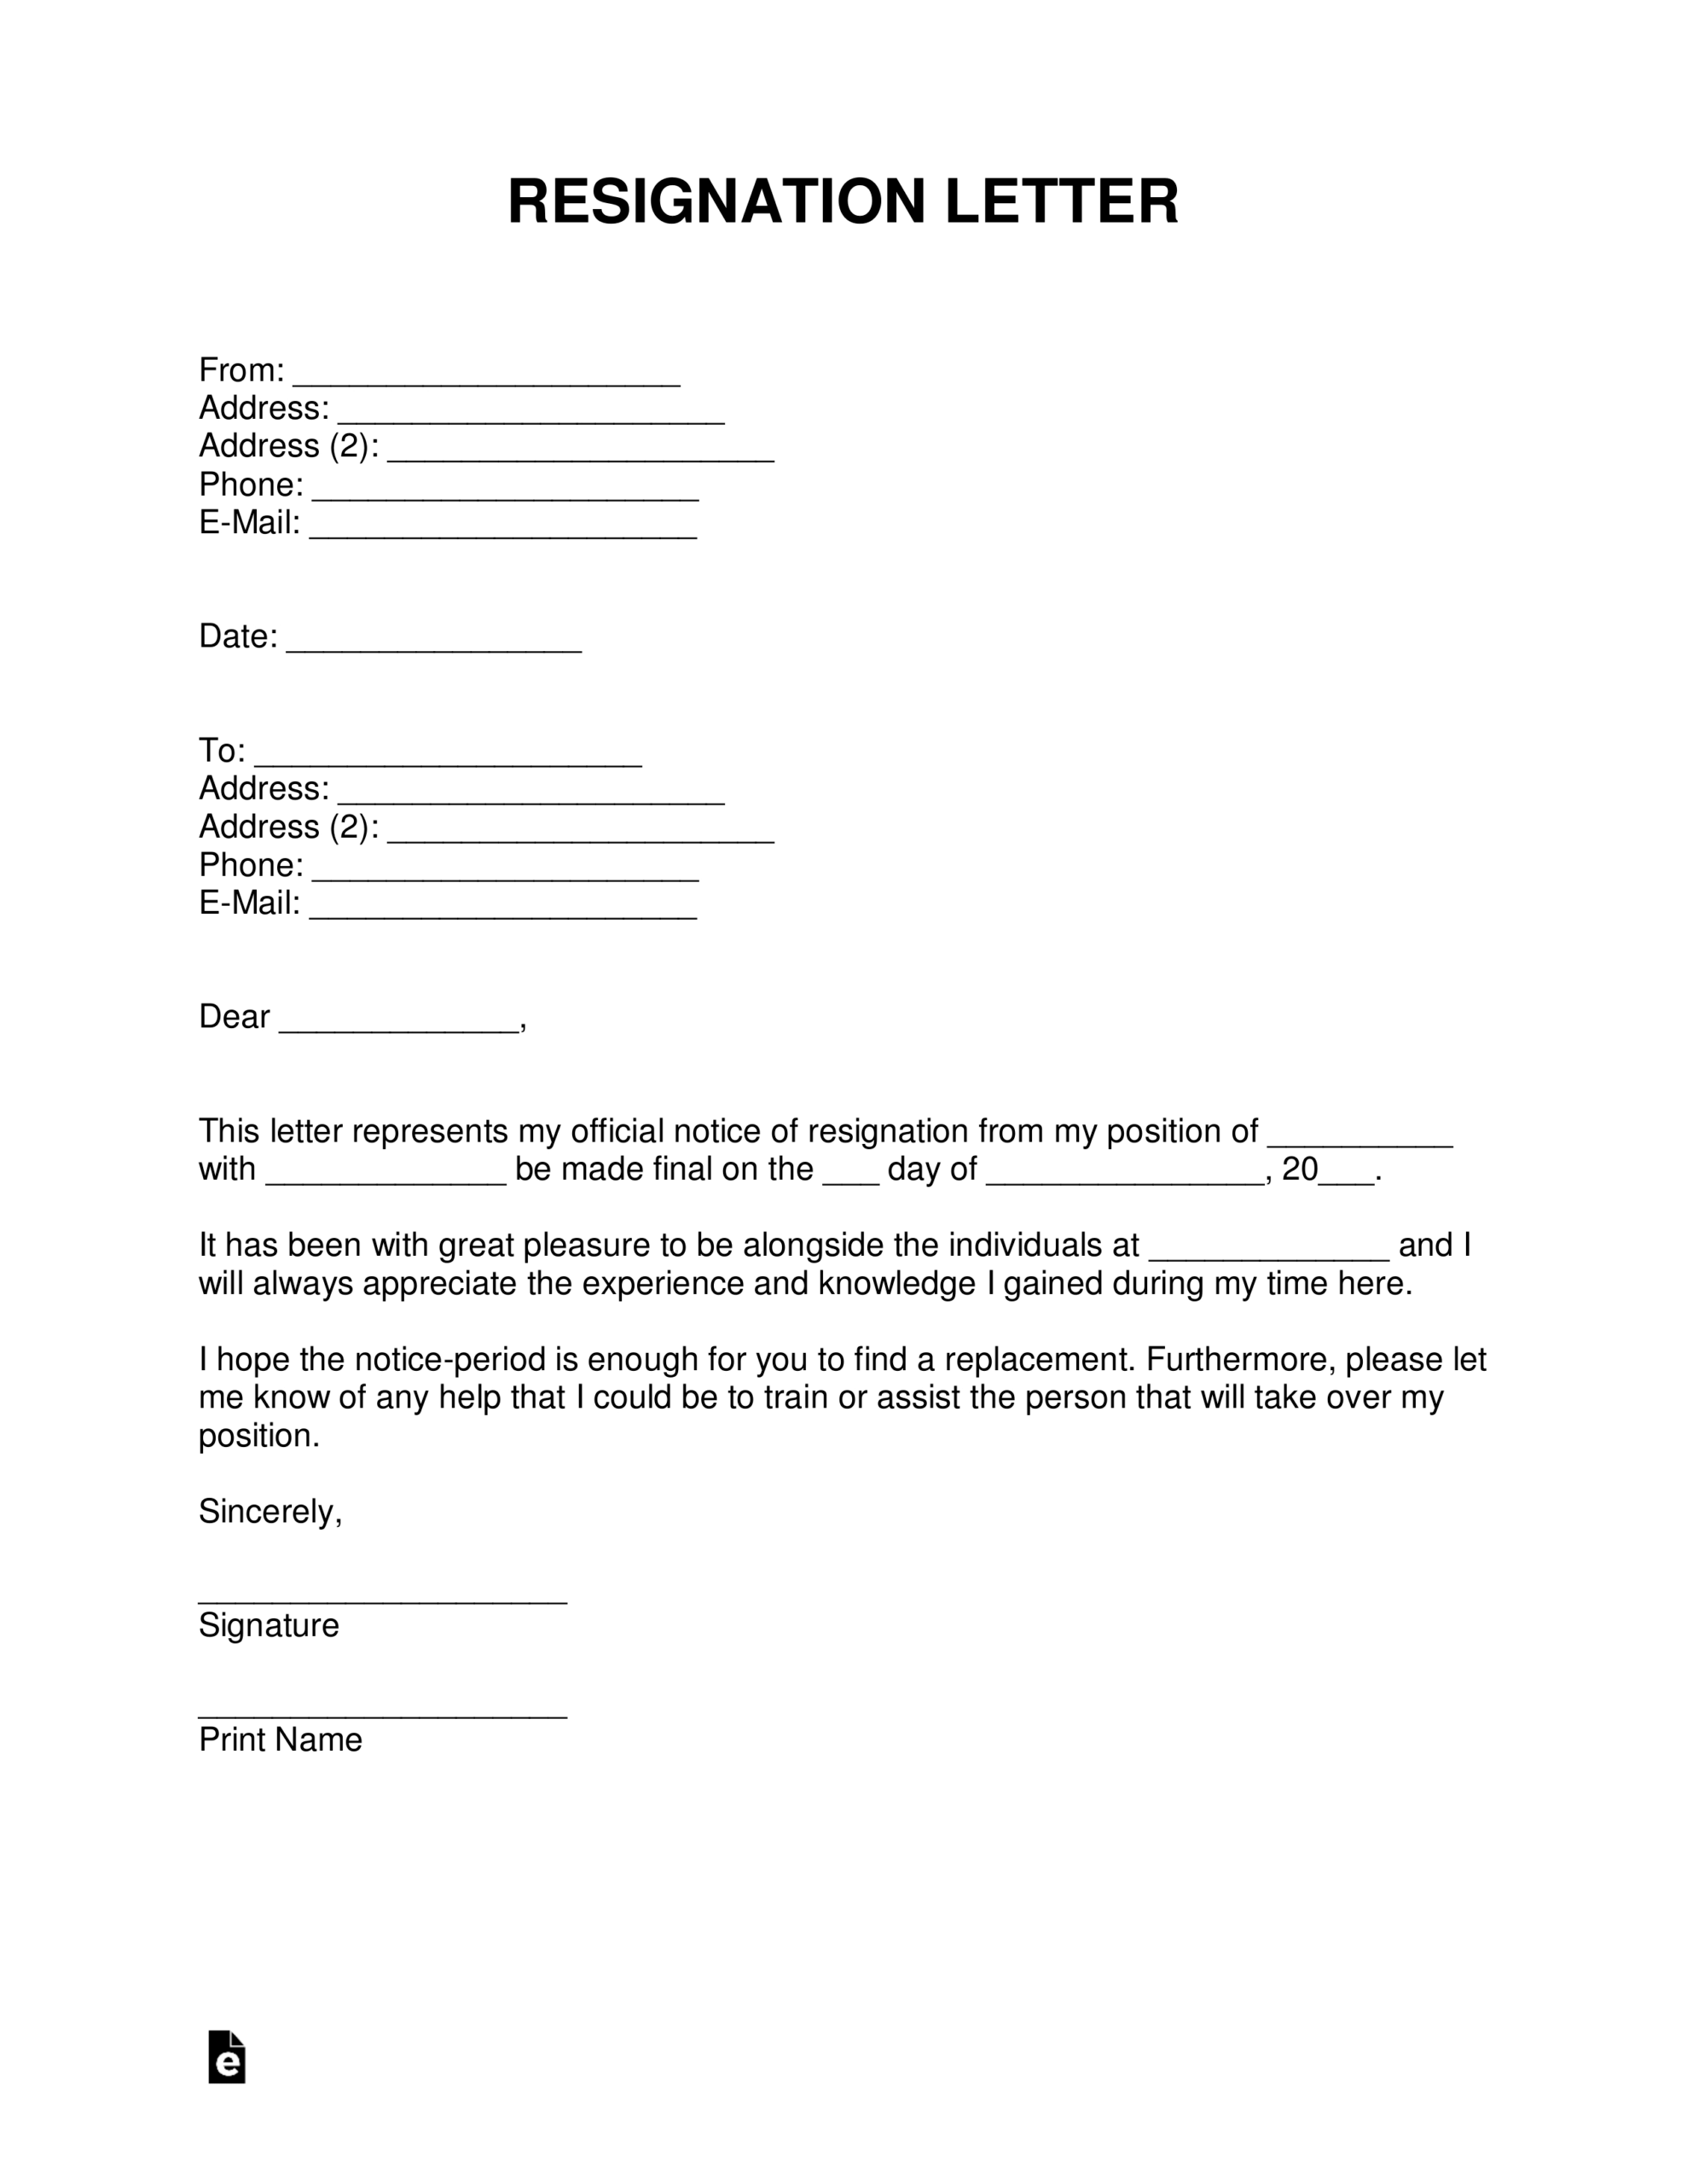 Free Resignation Letters | Templates & Samples - Pdf | Word With Regard To Two Week Notice Template Word